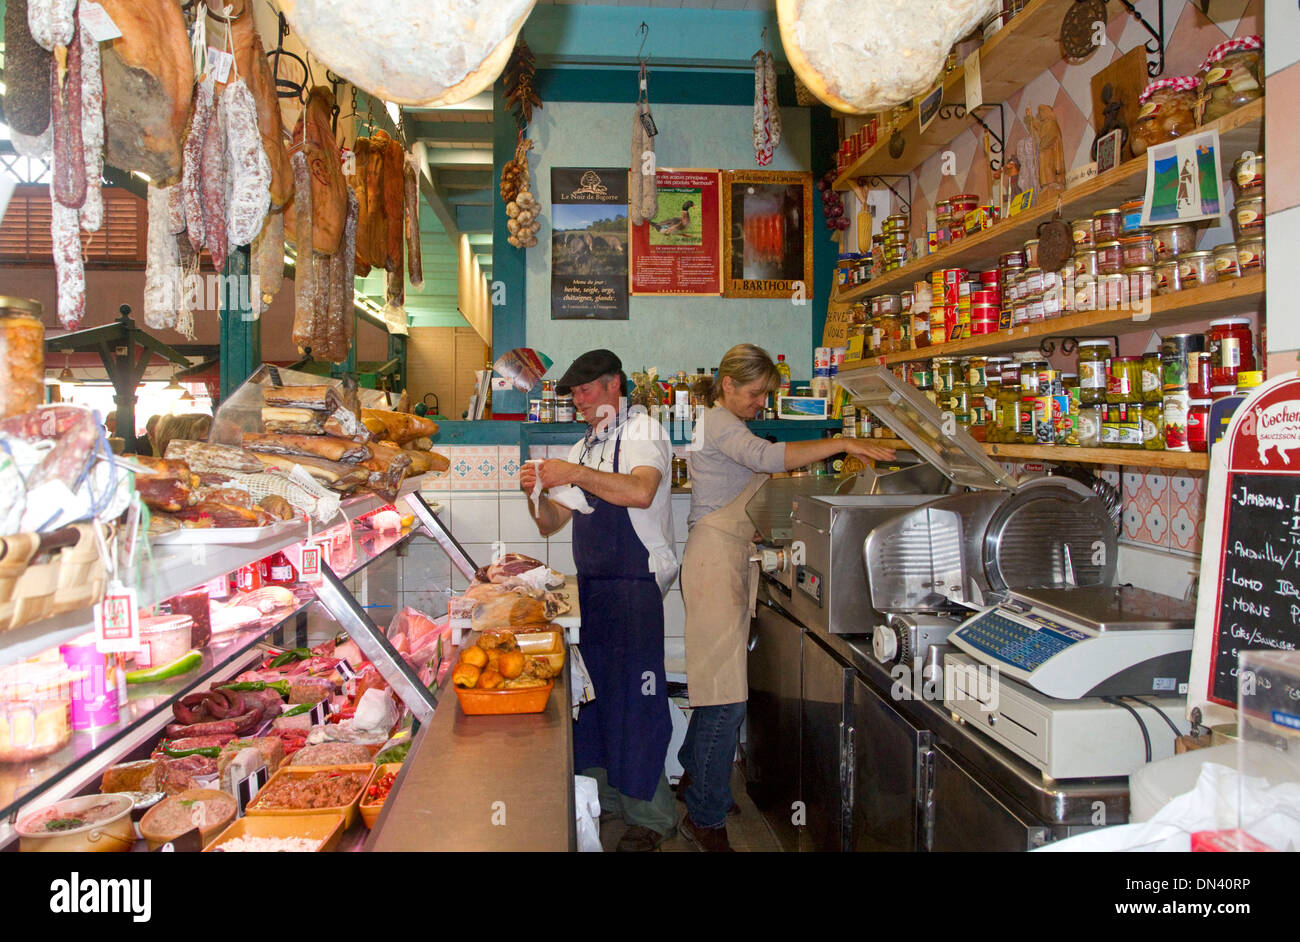 Charcuterie selling cured meats in a Basque market at Saint-Jean-de-Luz in the Basque province of Labourd, southwestern France. Stock Photo